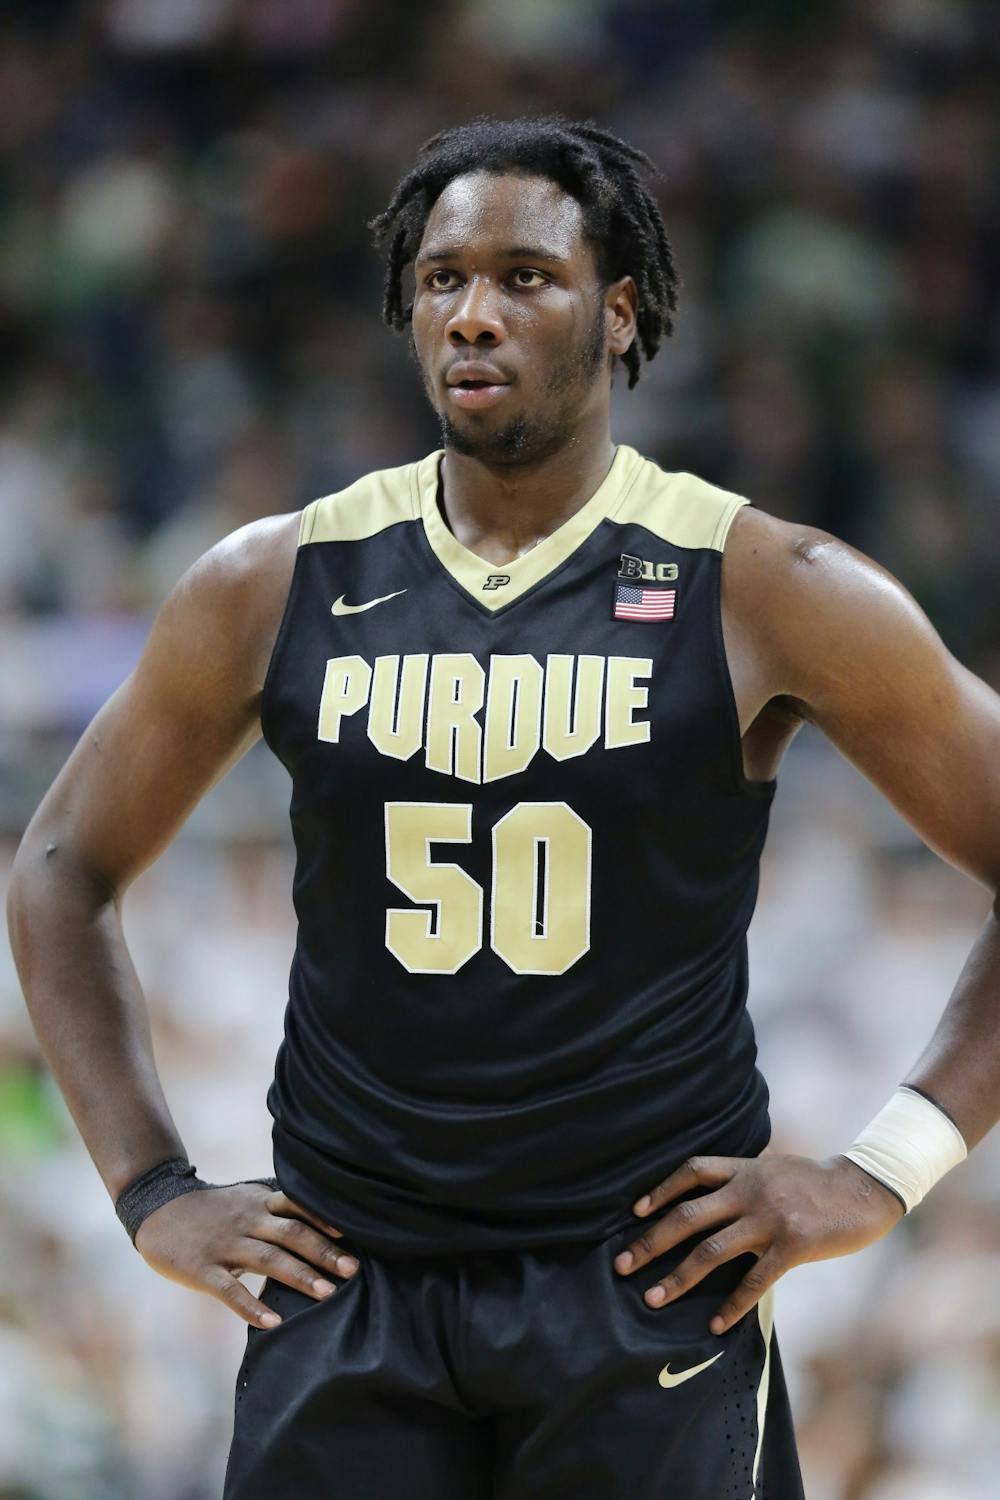 Former Homestead High School, Purdue University, Portland Trailblazers and Sacramento Kings basketball player Caleb Swanigan has died, as reported June 21, 2022. Swanigan was a first-round pick in the 2017 NBA Draft. (Bleacher Report)